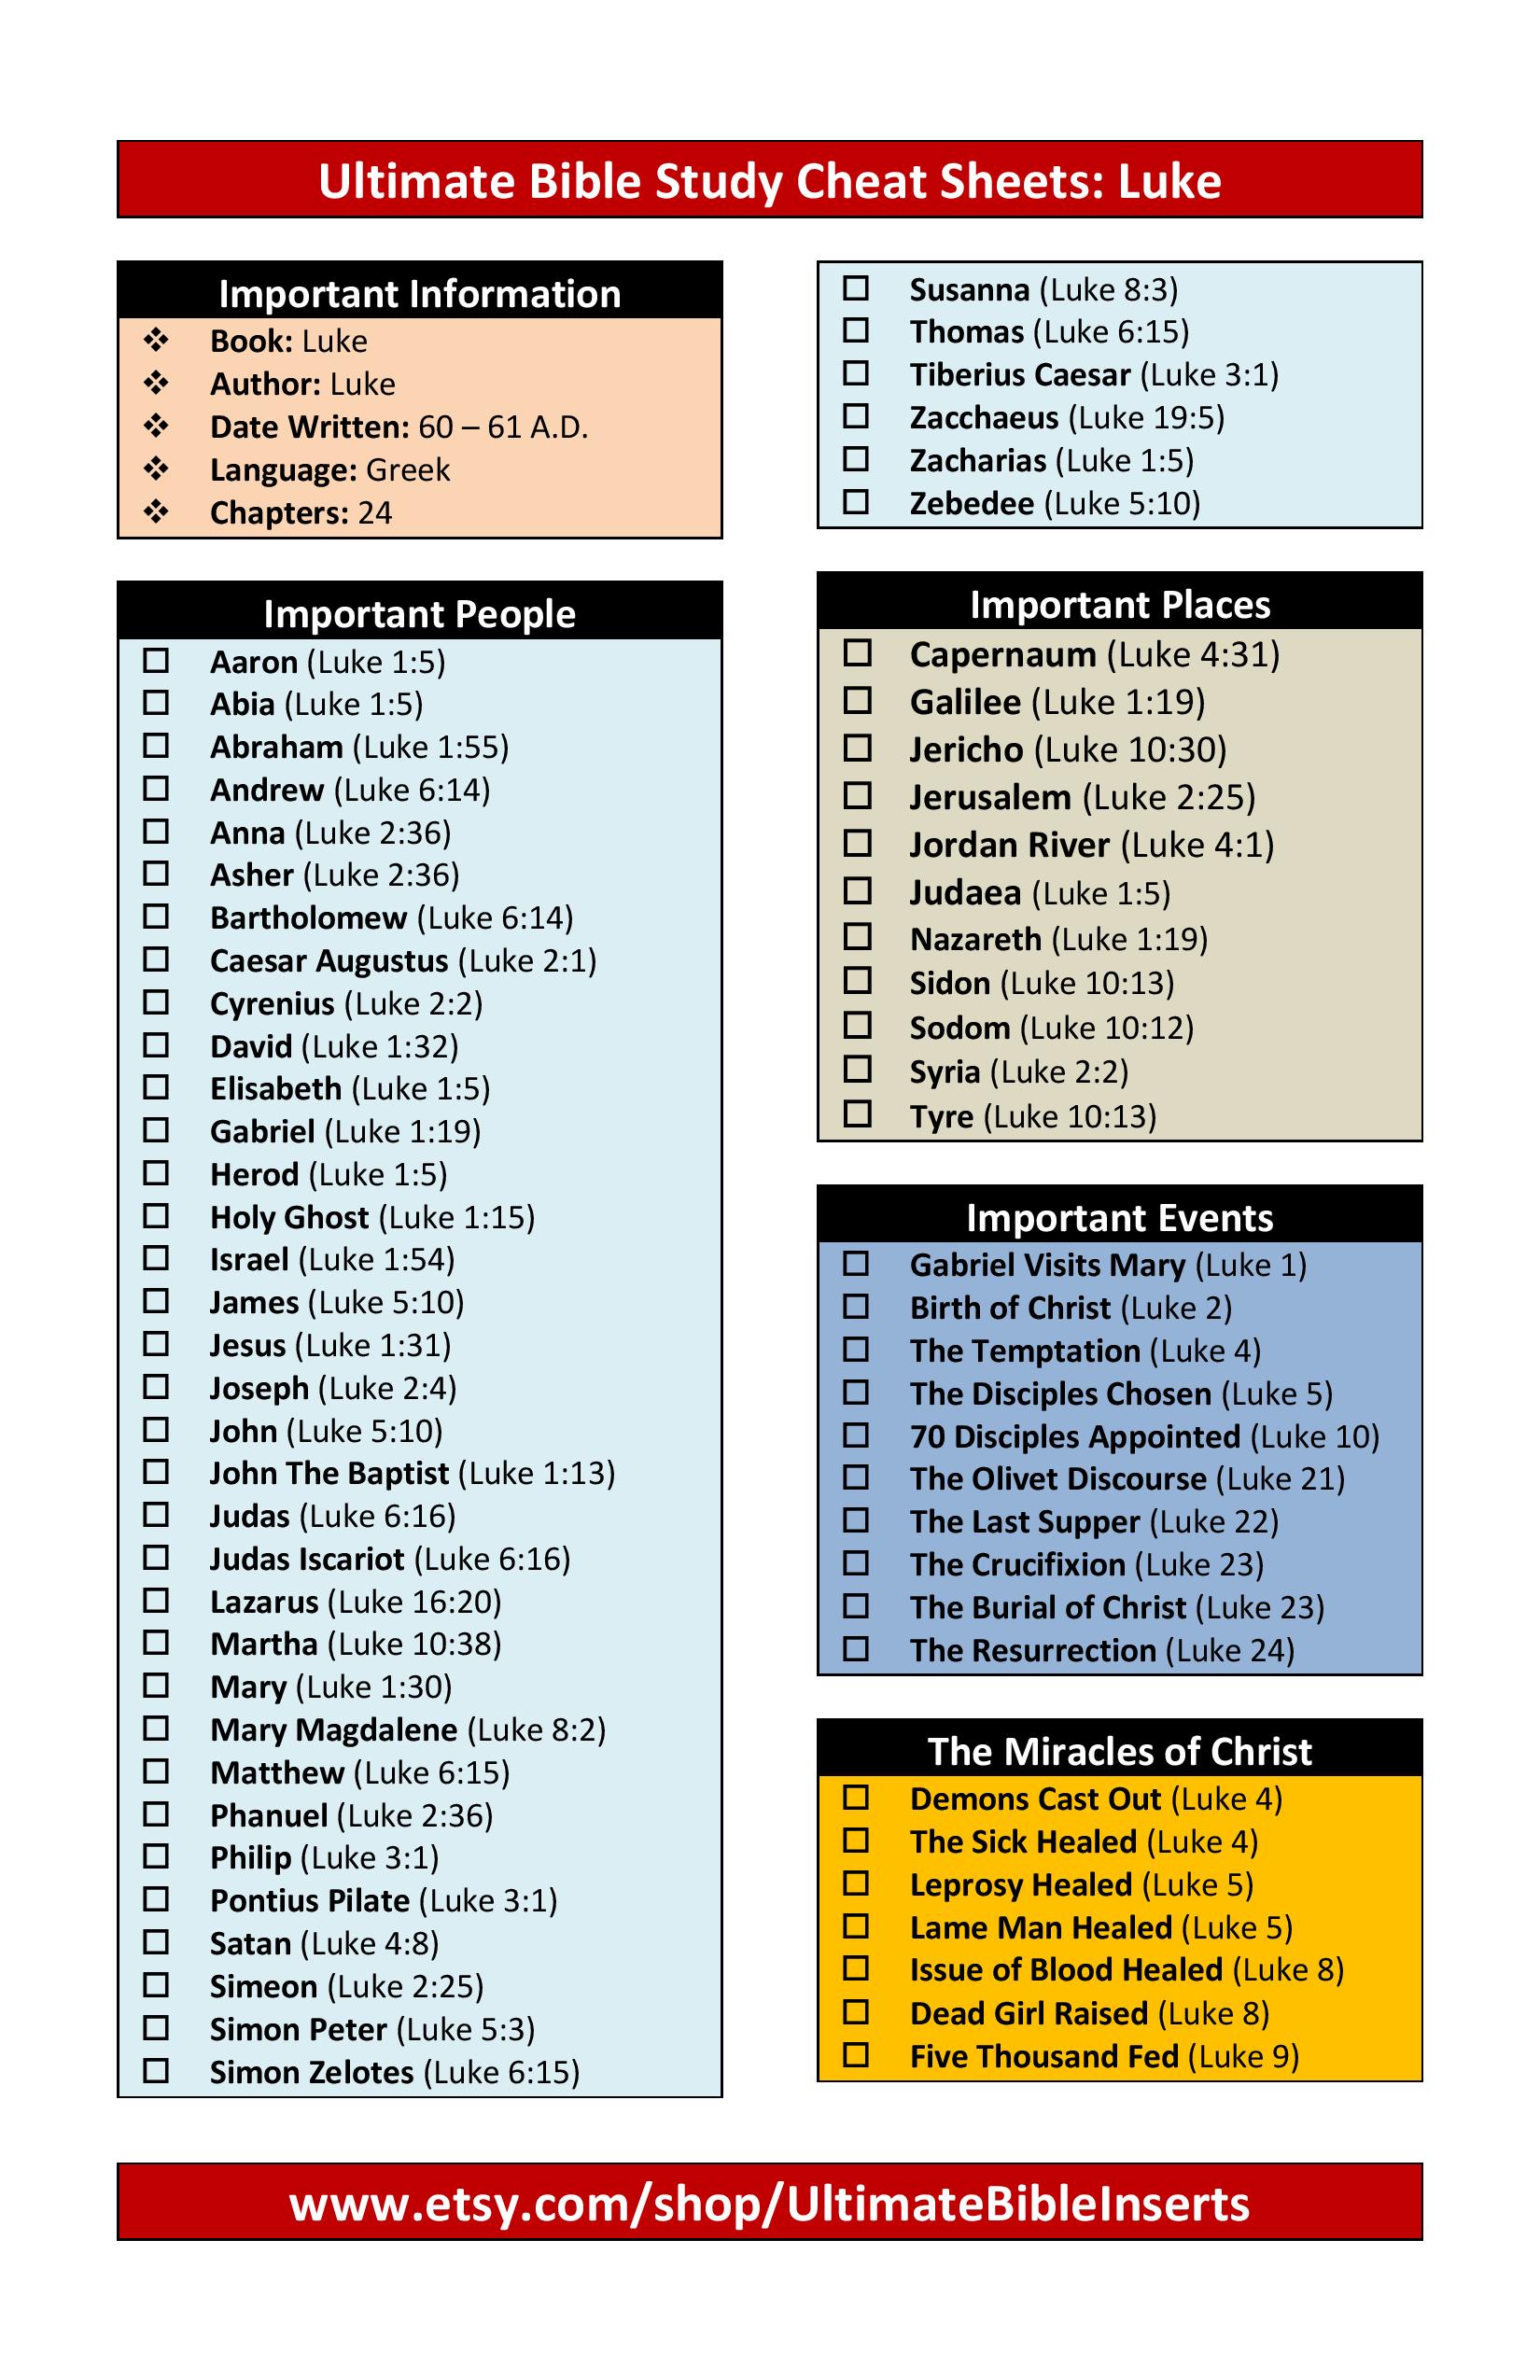 new-mark-and-luke-ultimate-bible-cheat-sheets-black-history-in-the